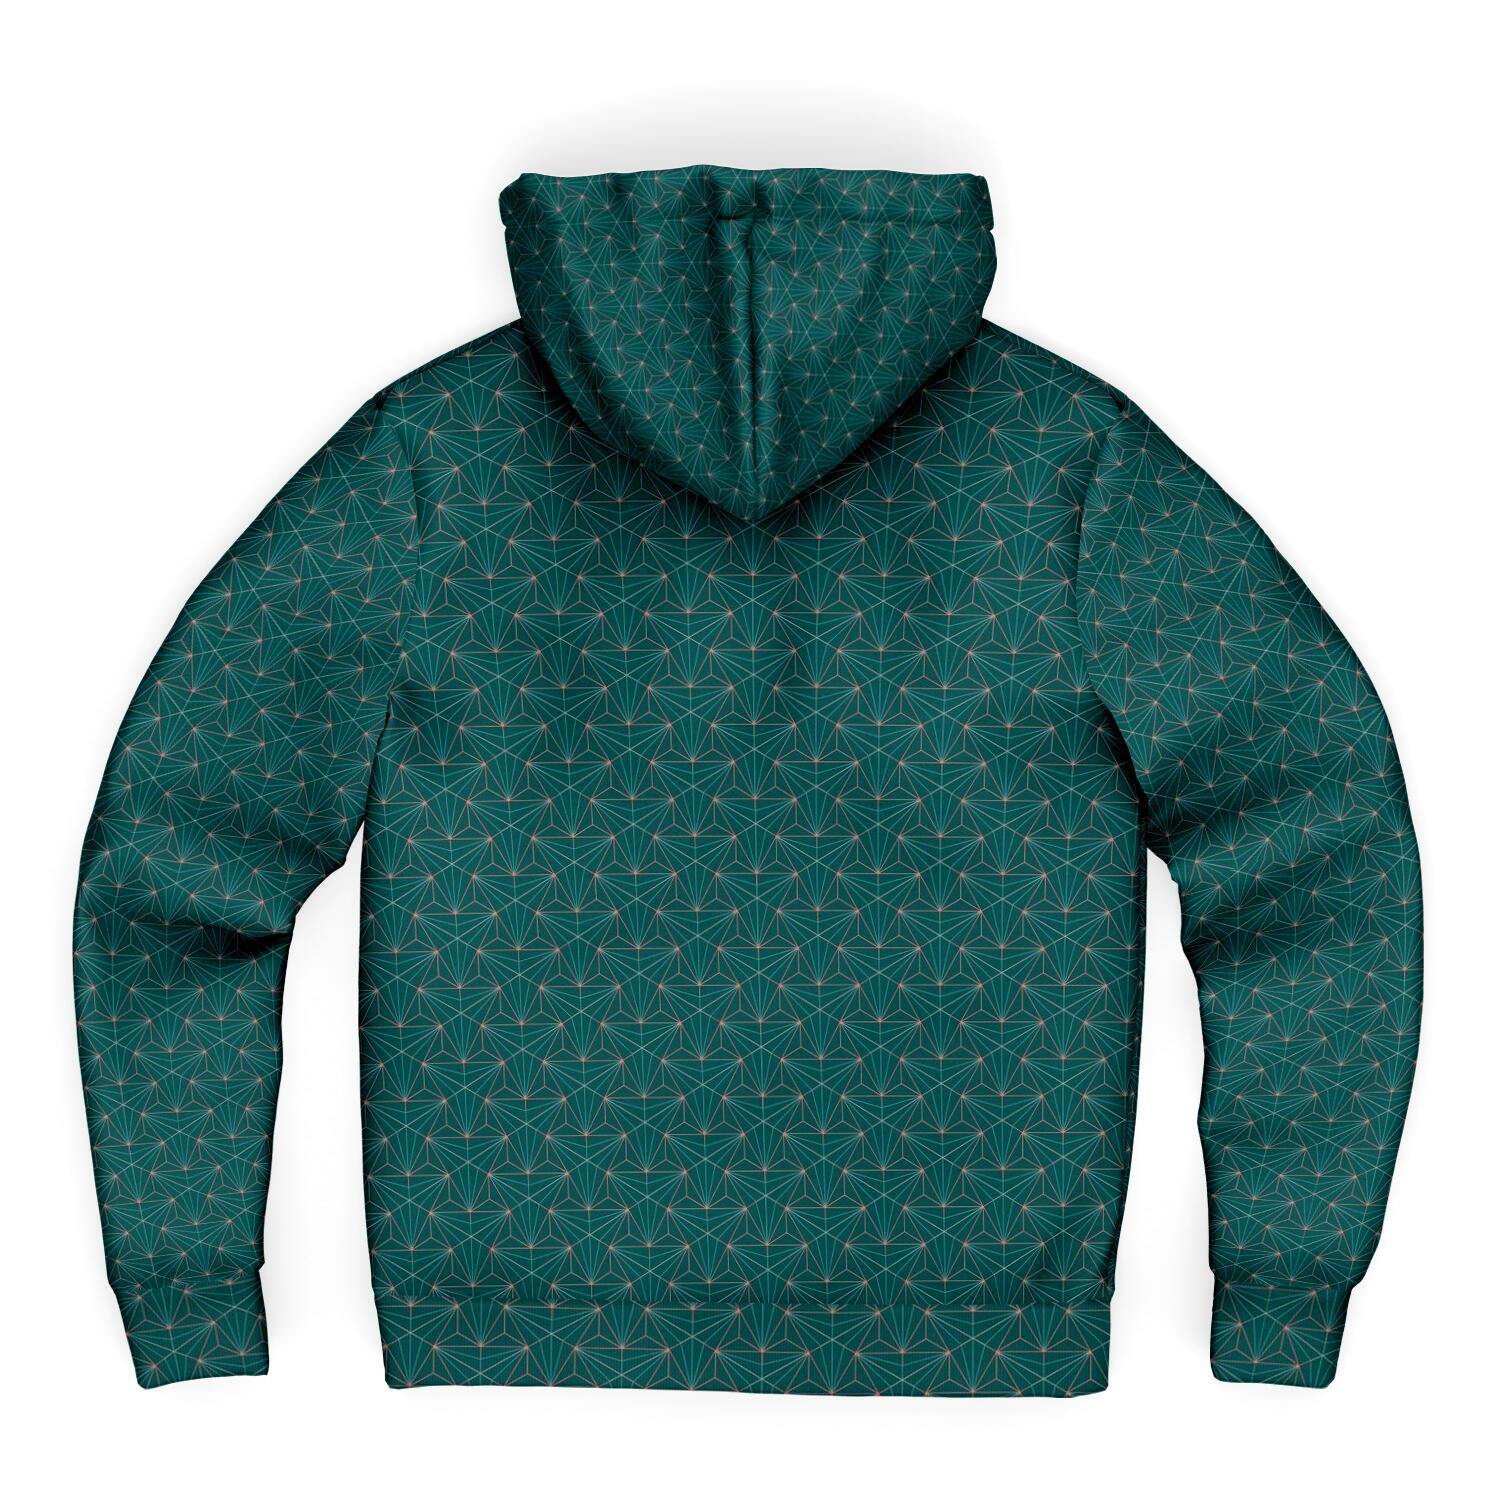 Turquoise Sacred Connections Premium Sherpa Lined Zip Hoodie - Manifestie